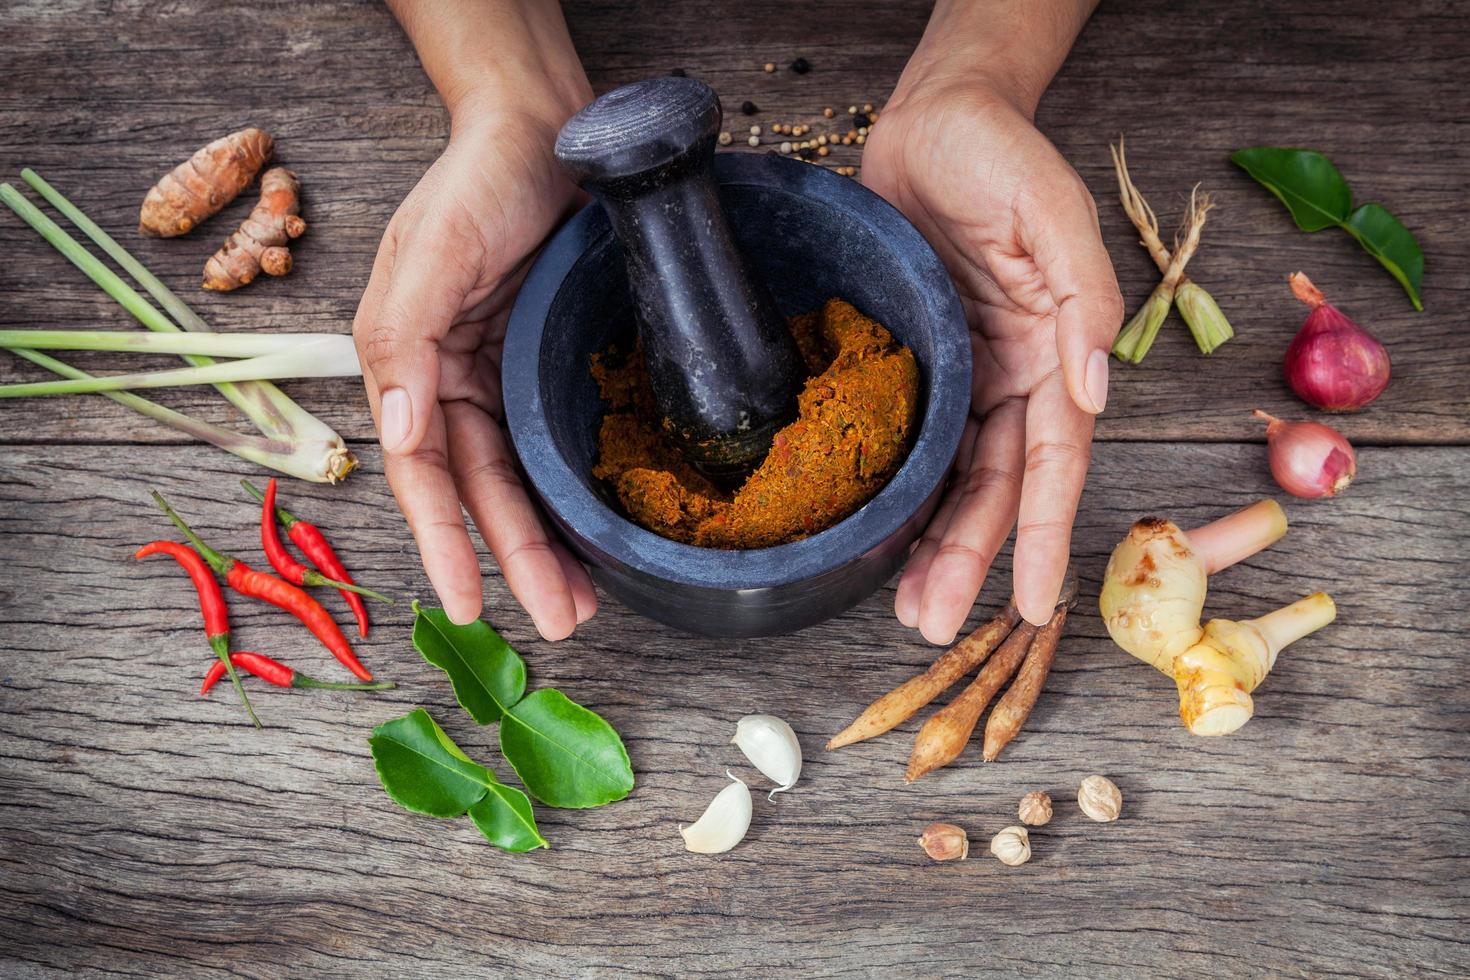 Hands with a mortar and pestle and spices photo